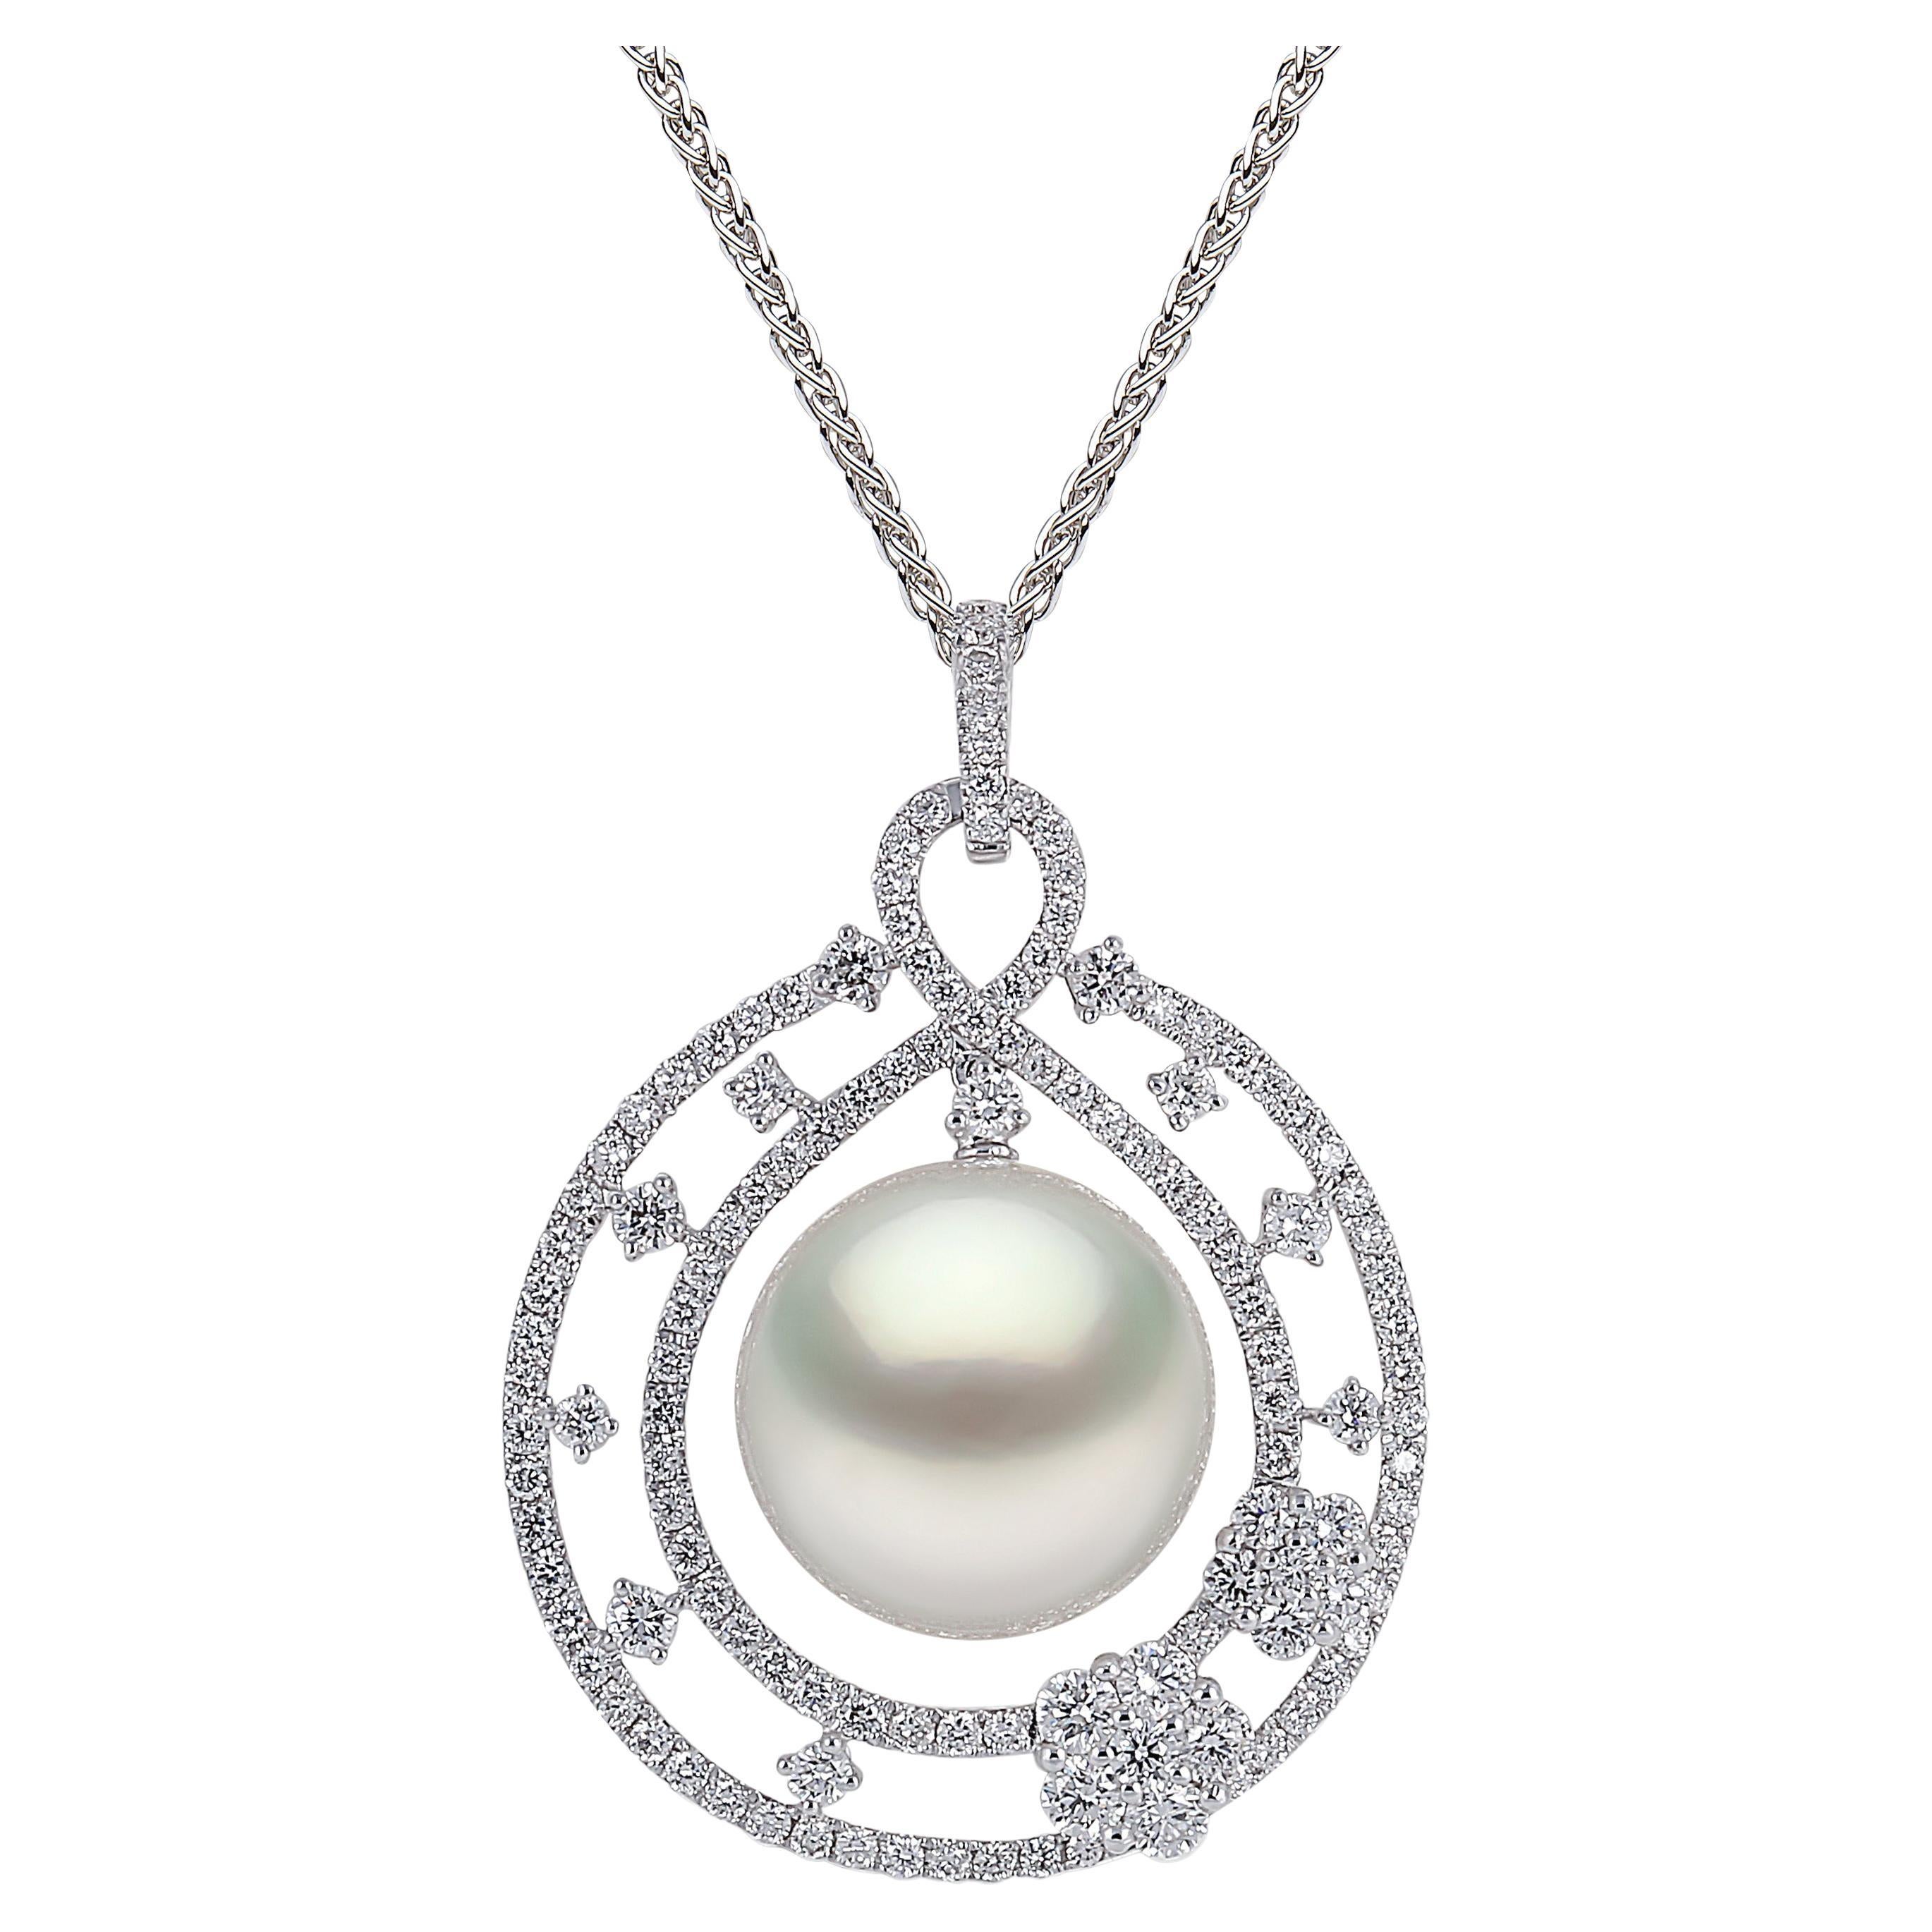 Yoko London South Sea Pearl and Diamond Necklace in 18K White Gold